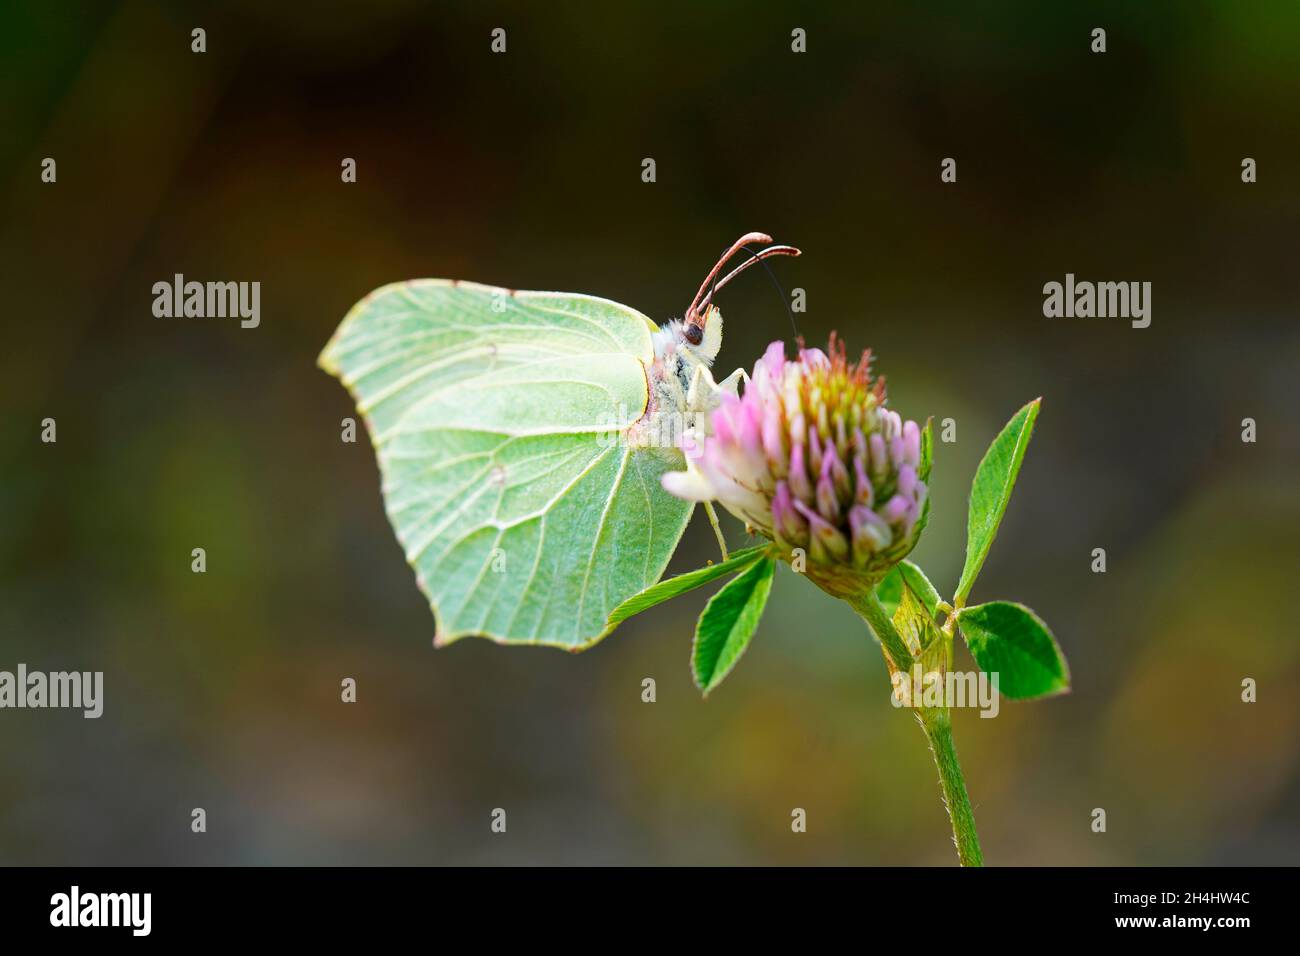 Brimstone butterfly on a clover blossom. Insect close up. Yellow butterfly in natural environment. Gonepteryx rhamni Stock Photo